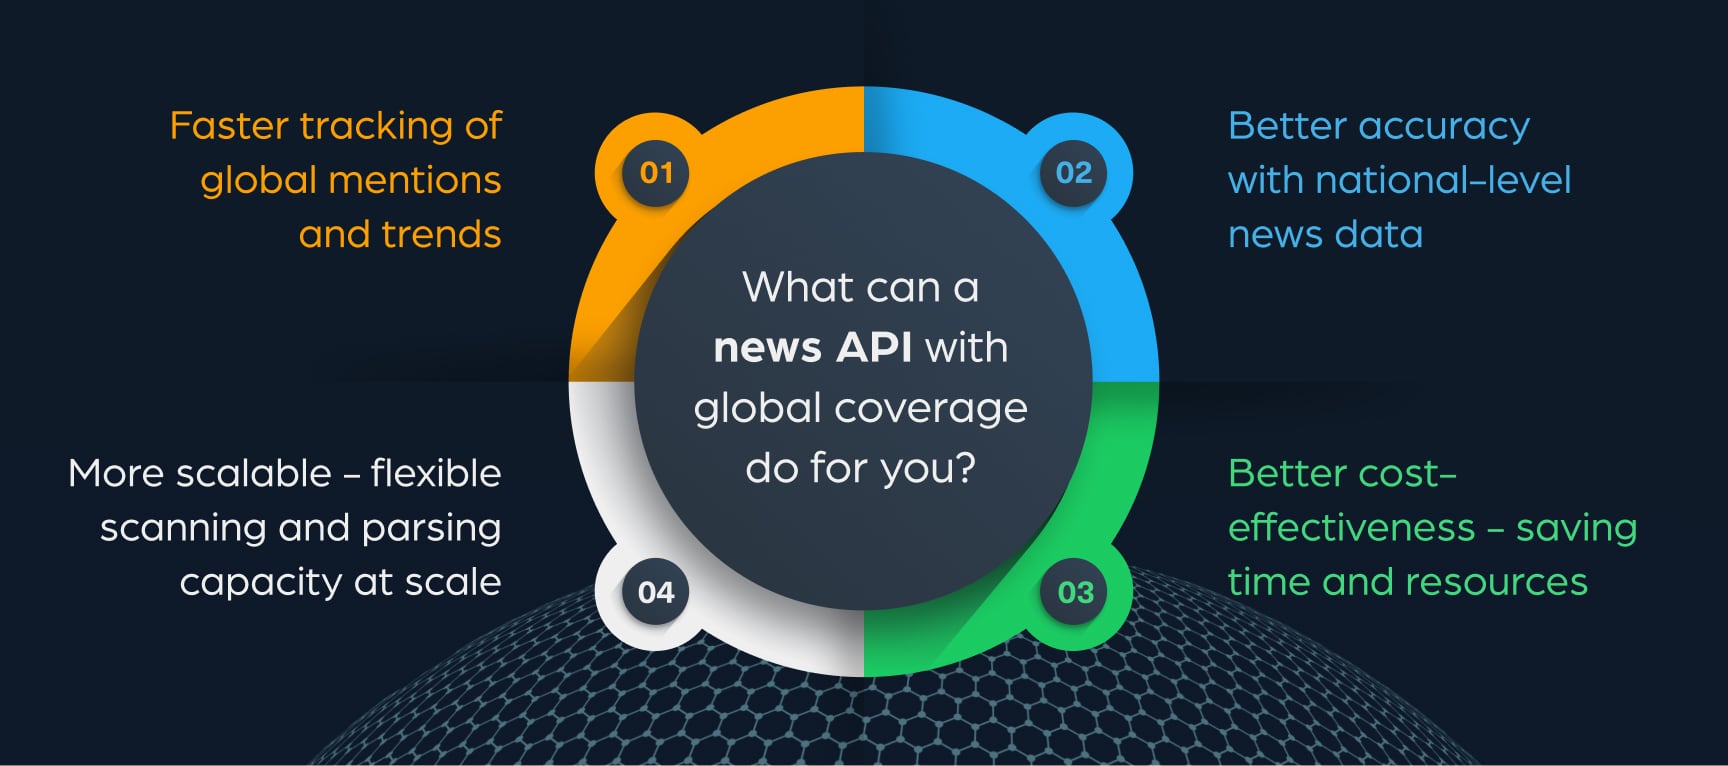 What can a powerful news API with global coverage do for you?